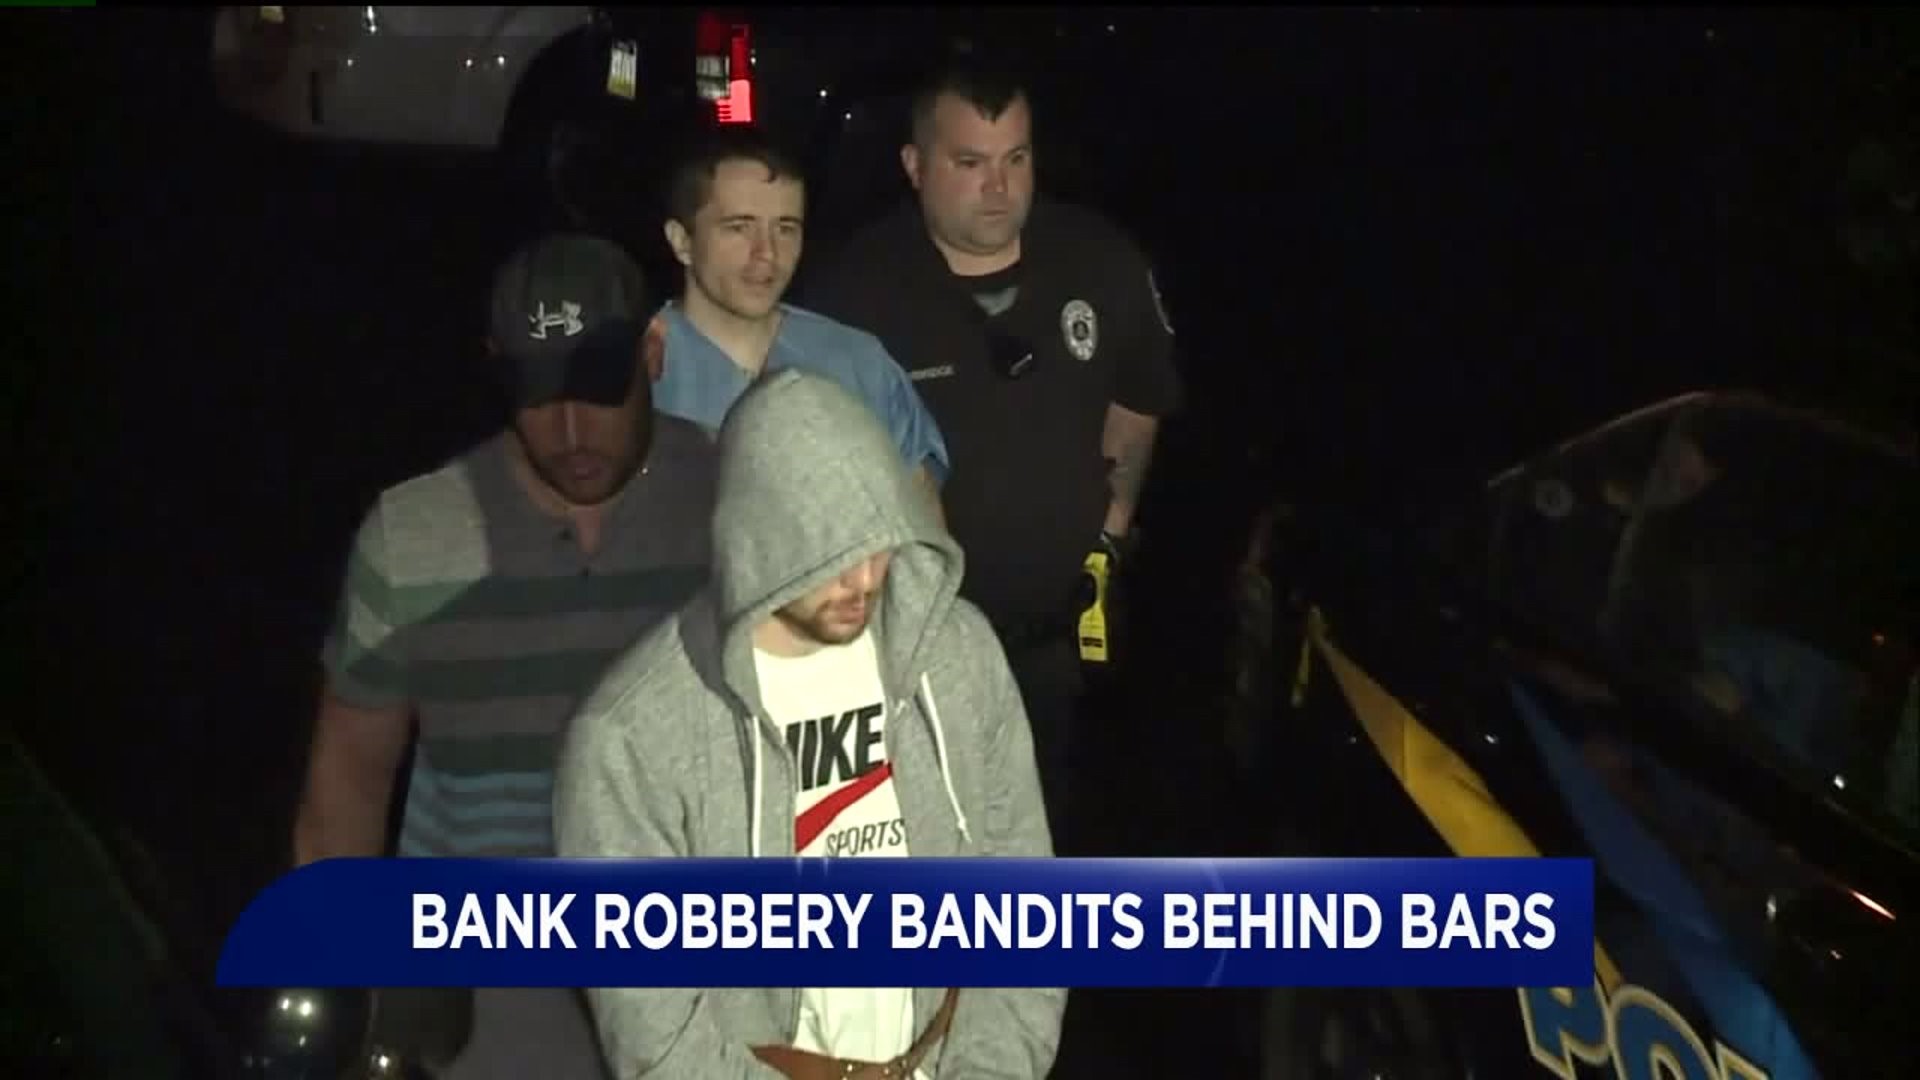 Bank Robbery Suspects Locked Up in Luzerne County